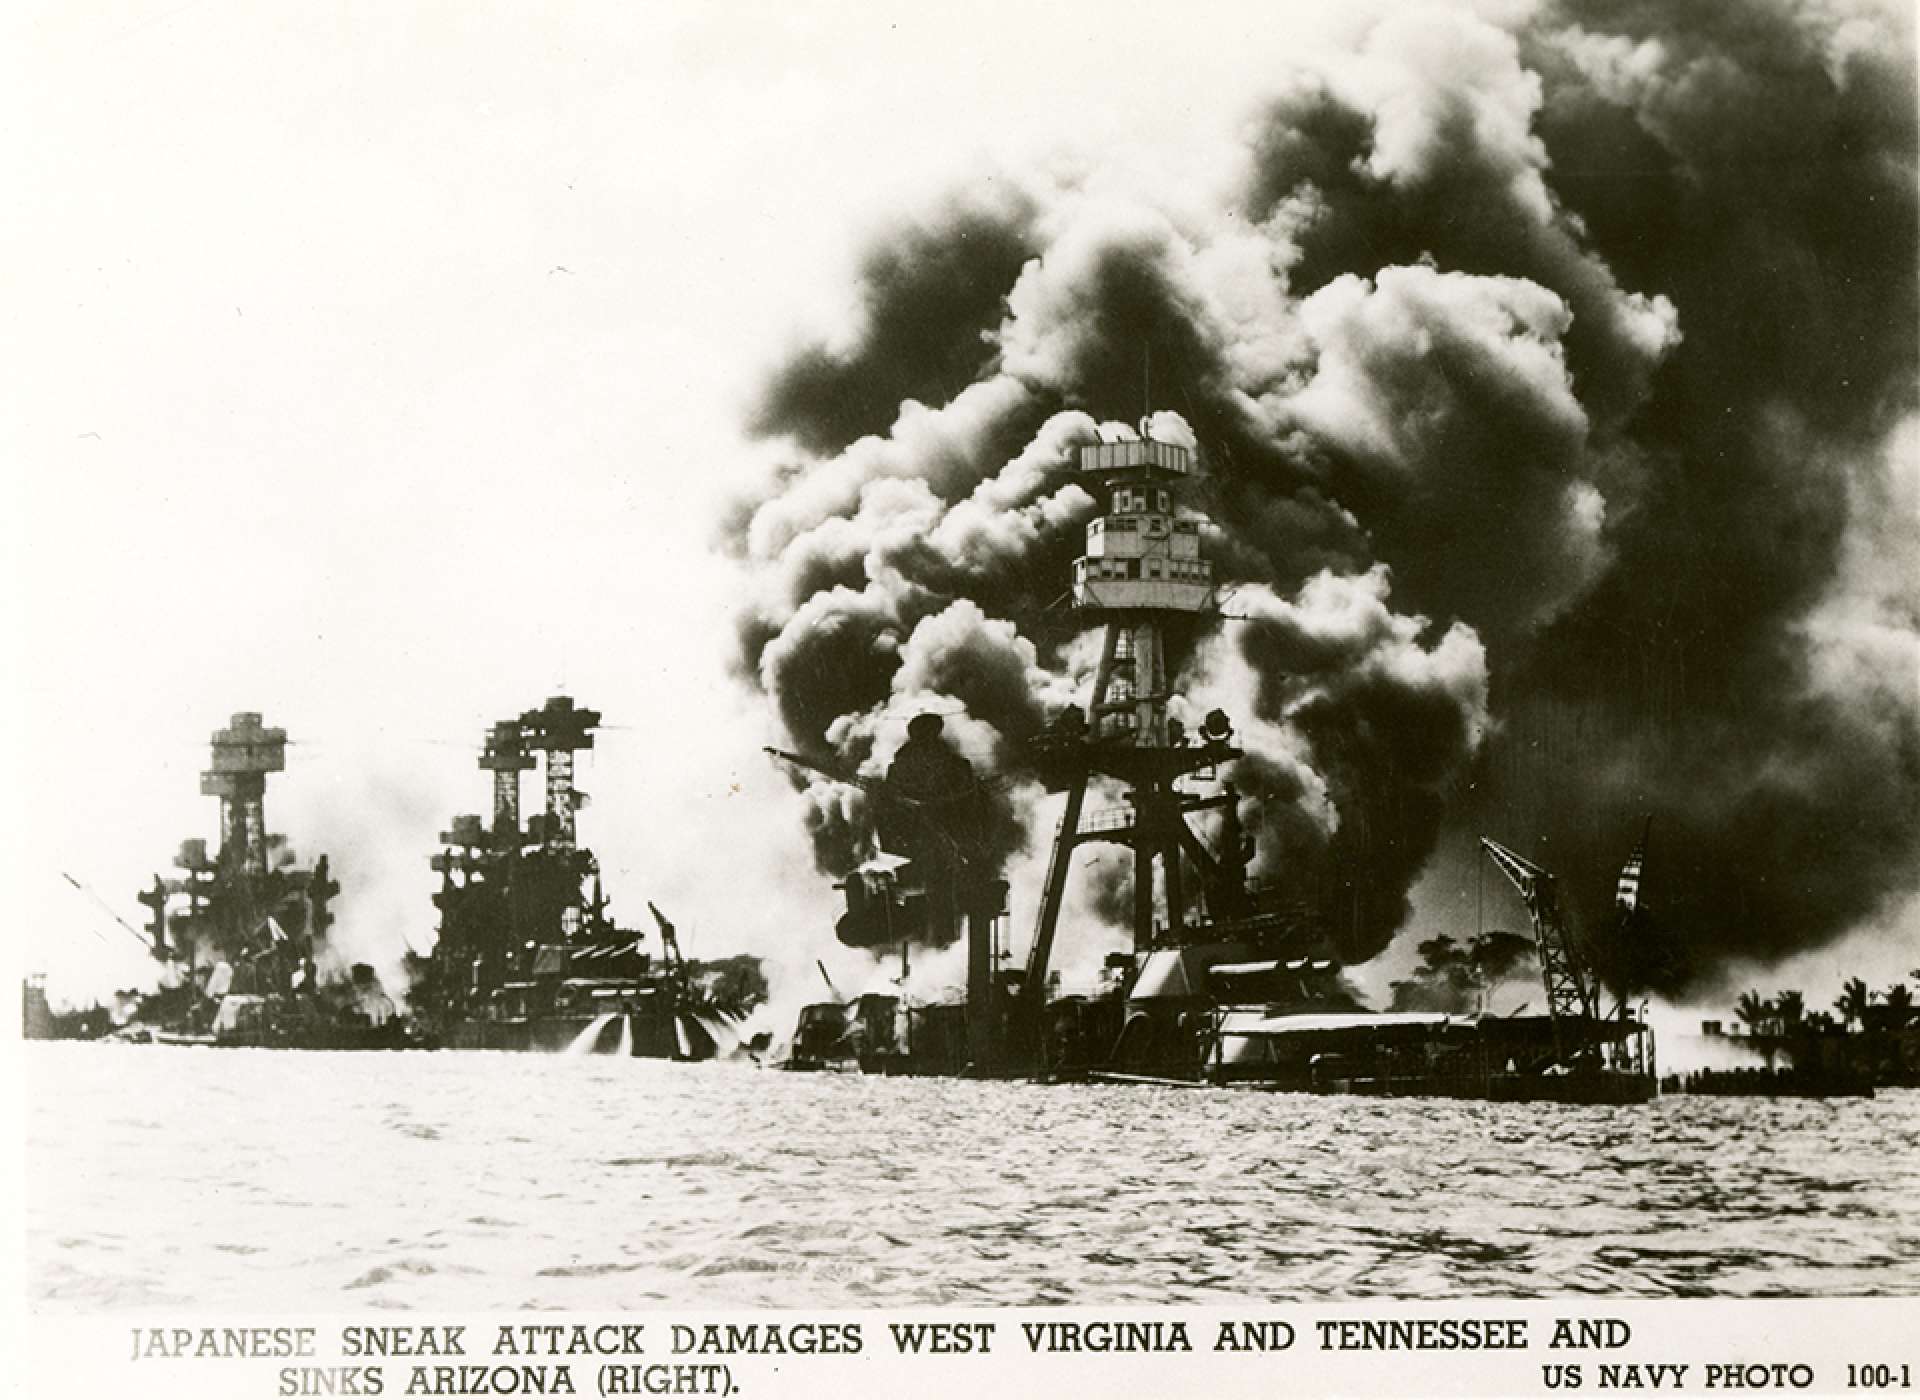 Attack on Pearl Harbor and the USS West Virginia, Tennessee, and Arizona in December 1941